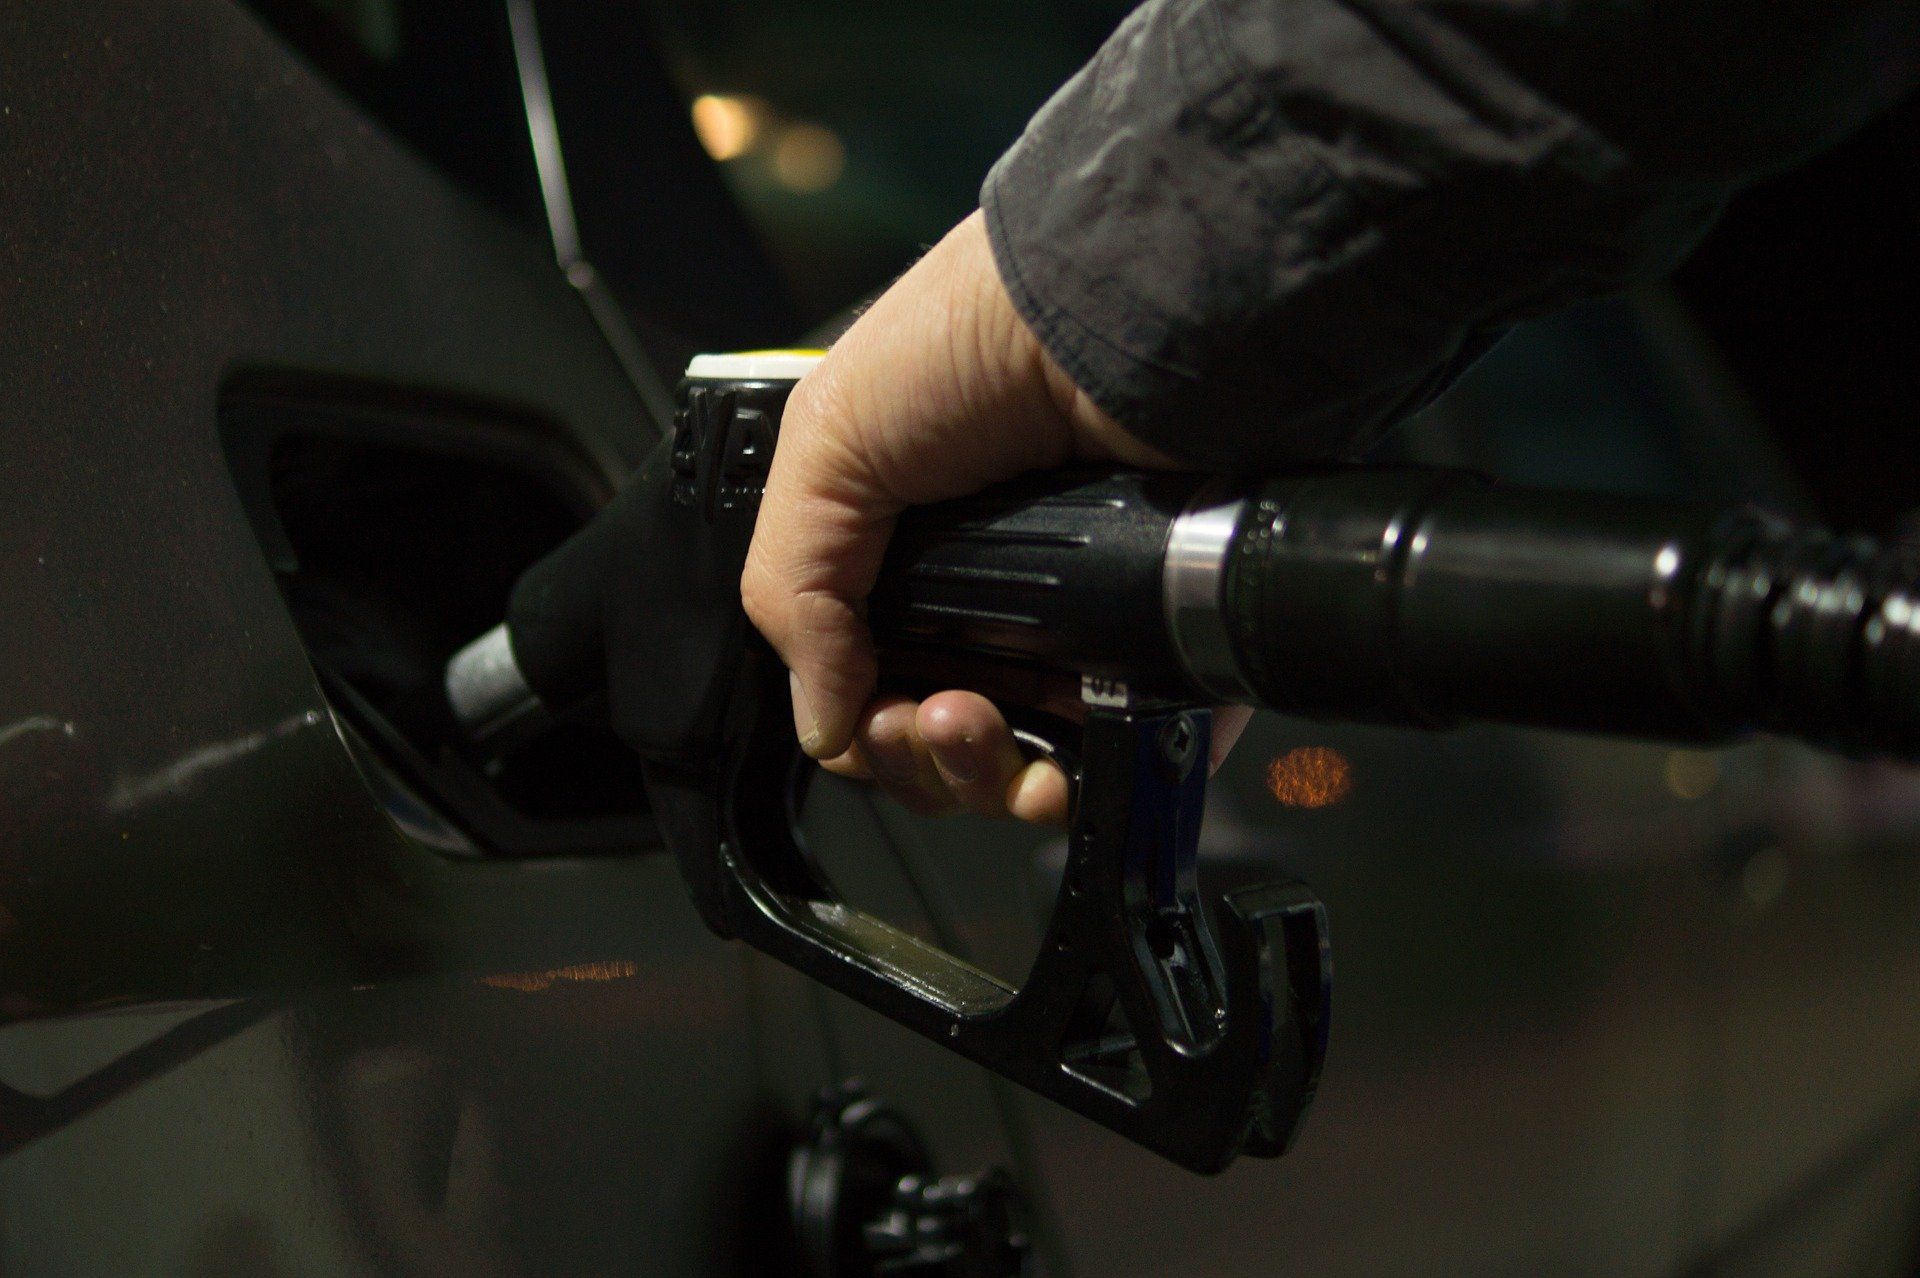 Fuel prices: Petrol priced at Rs 95.41, diesel Rs 86.67 in Delhi on March 11, 2022